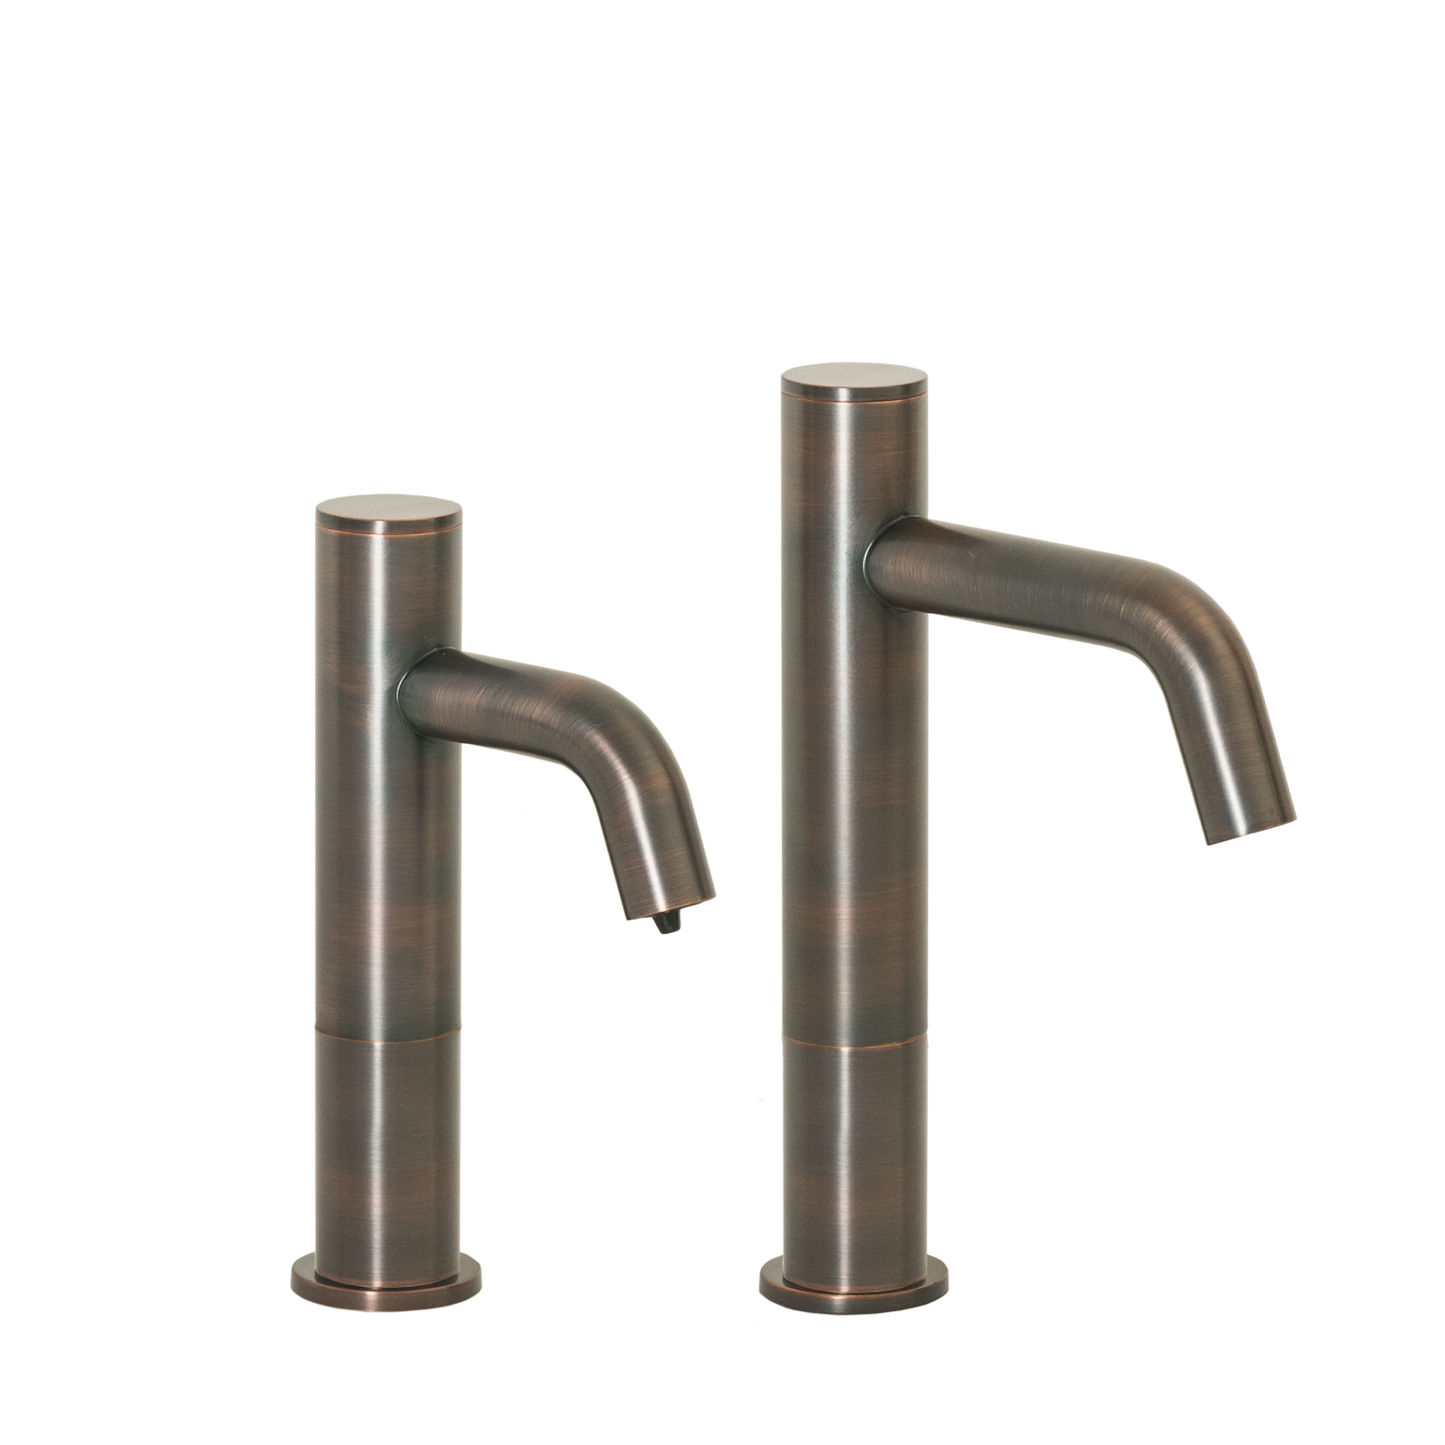 MP3263 Automatic Hands-Free Faucet with 6” Spout Reach, 3” Riser and Automatic Soap Dispenser with 32oz. Bottle In Venetian Bronze